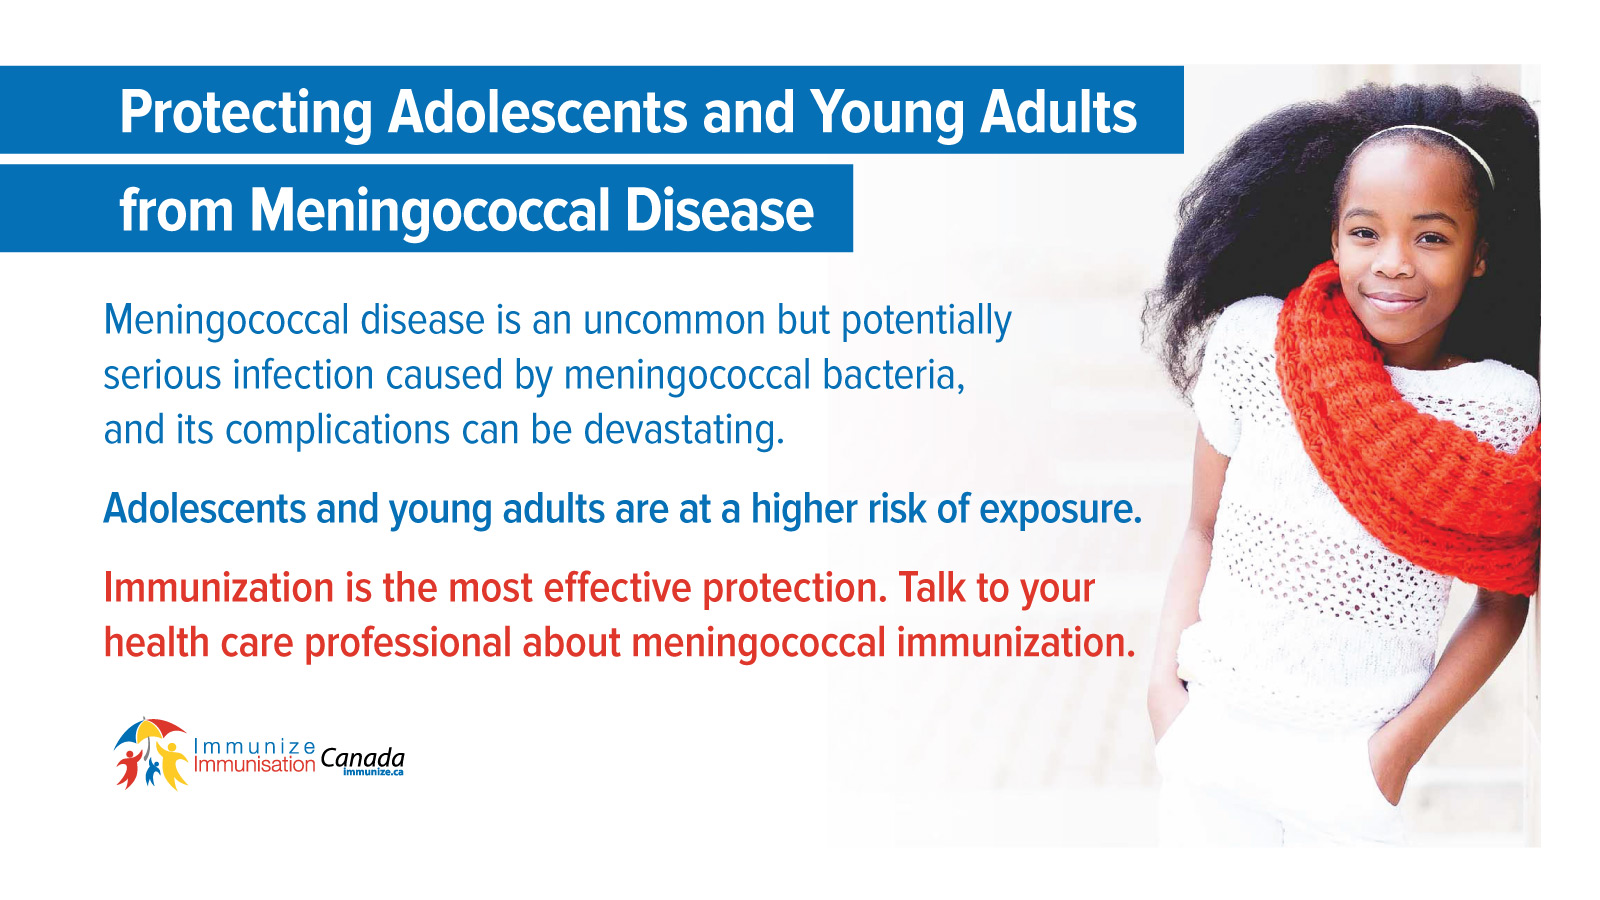 Protecting Adolescents and Young Adults from Meningococcal Disease - image 1 for Twitter